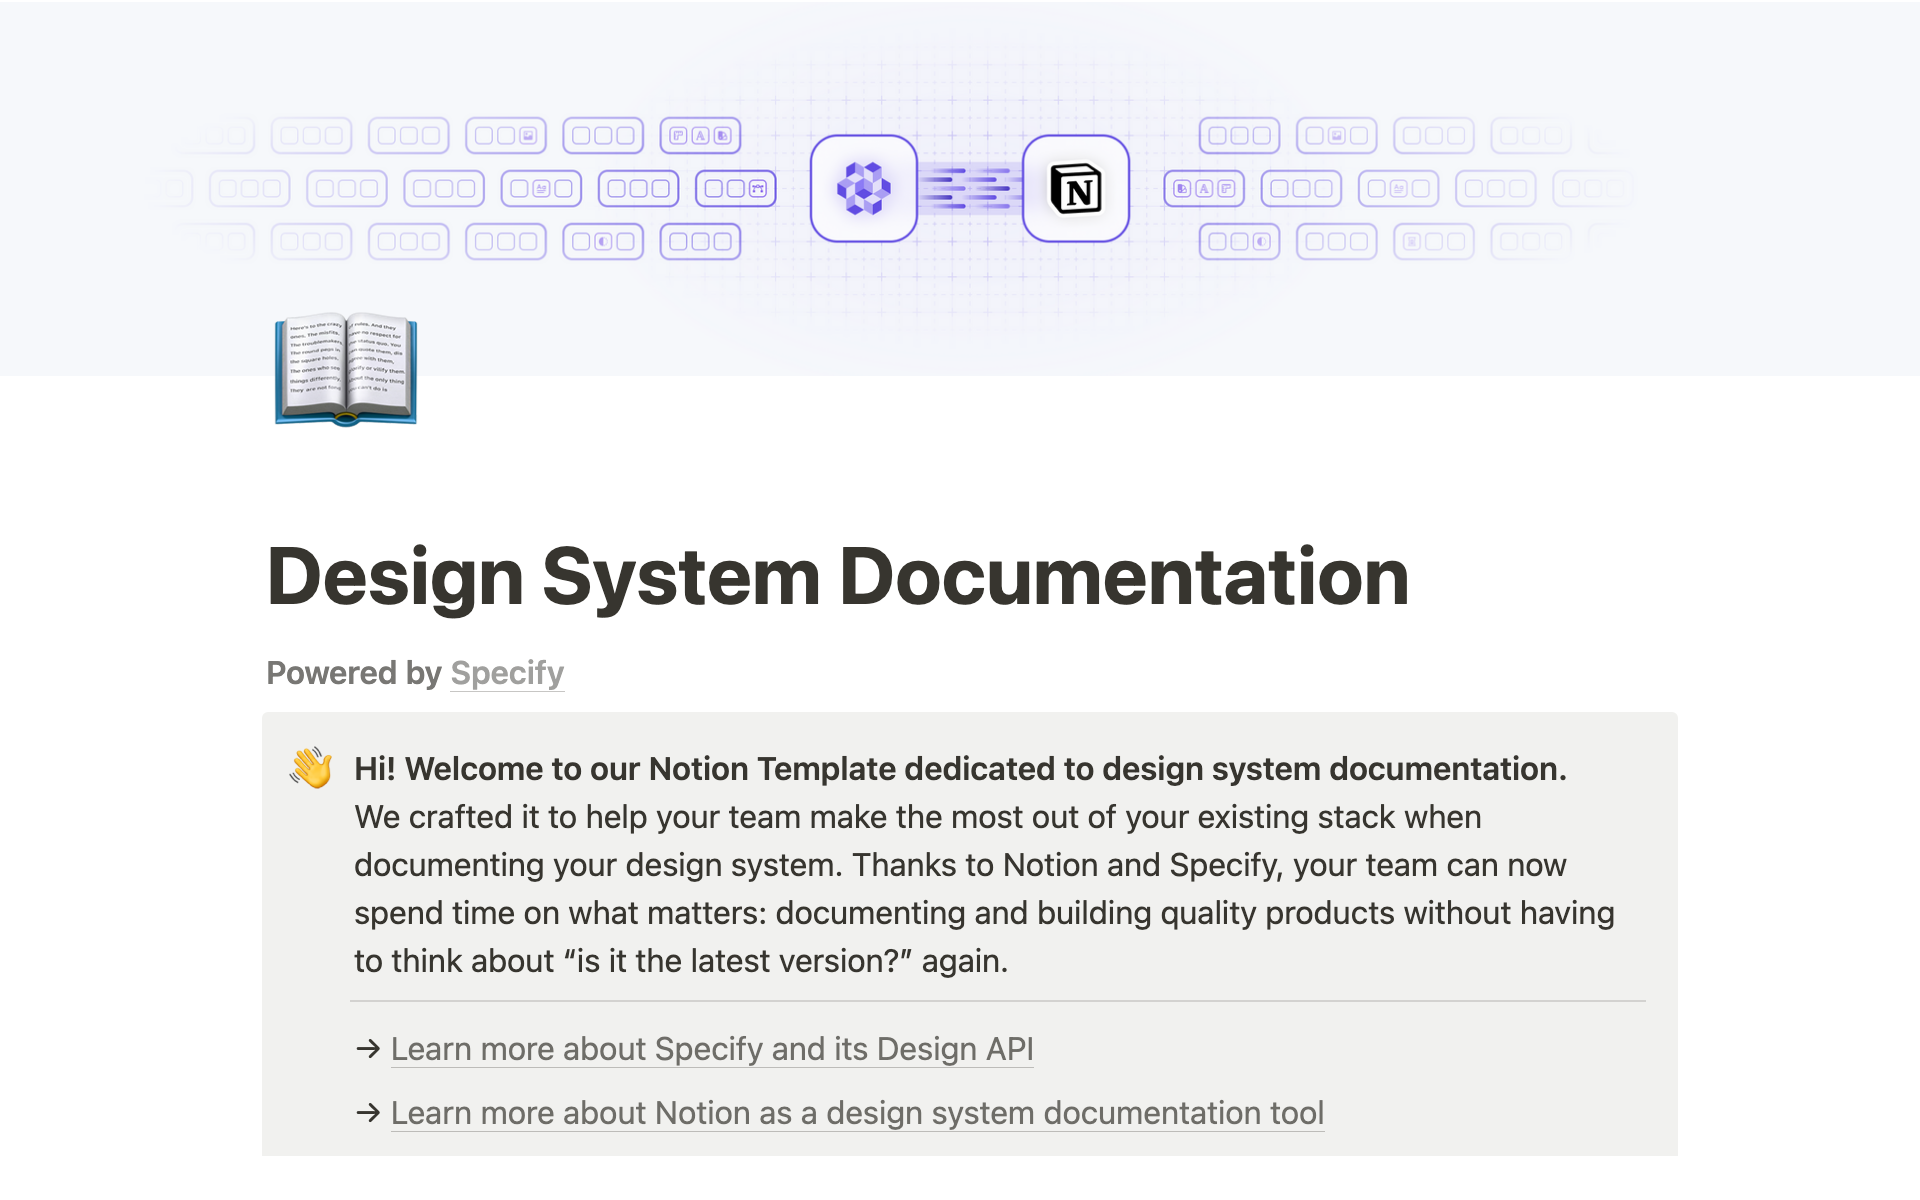 Document all your design decisions: foundations, design tokens, components, add useful resources and create a dedicated changelog.